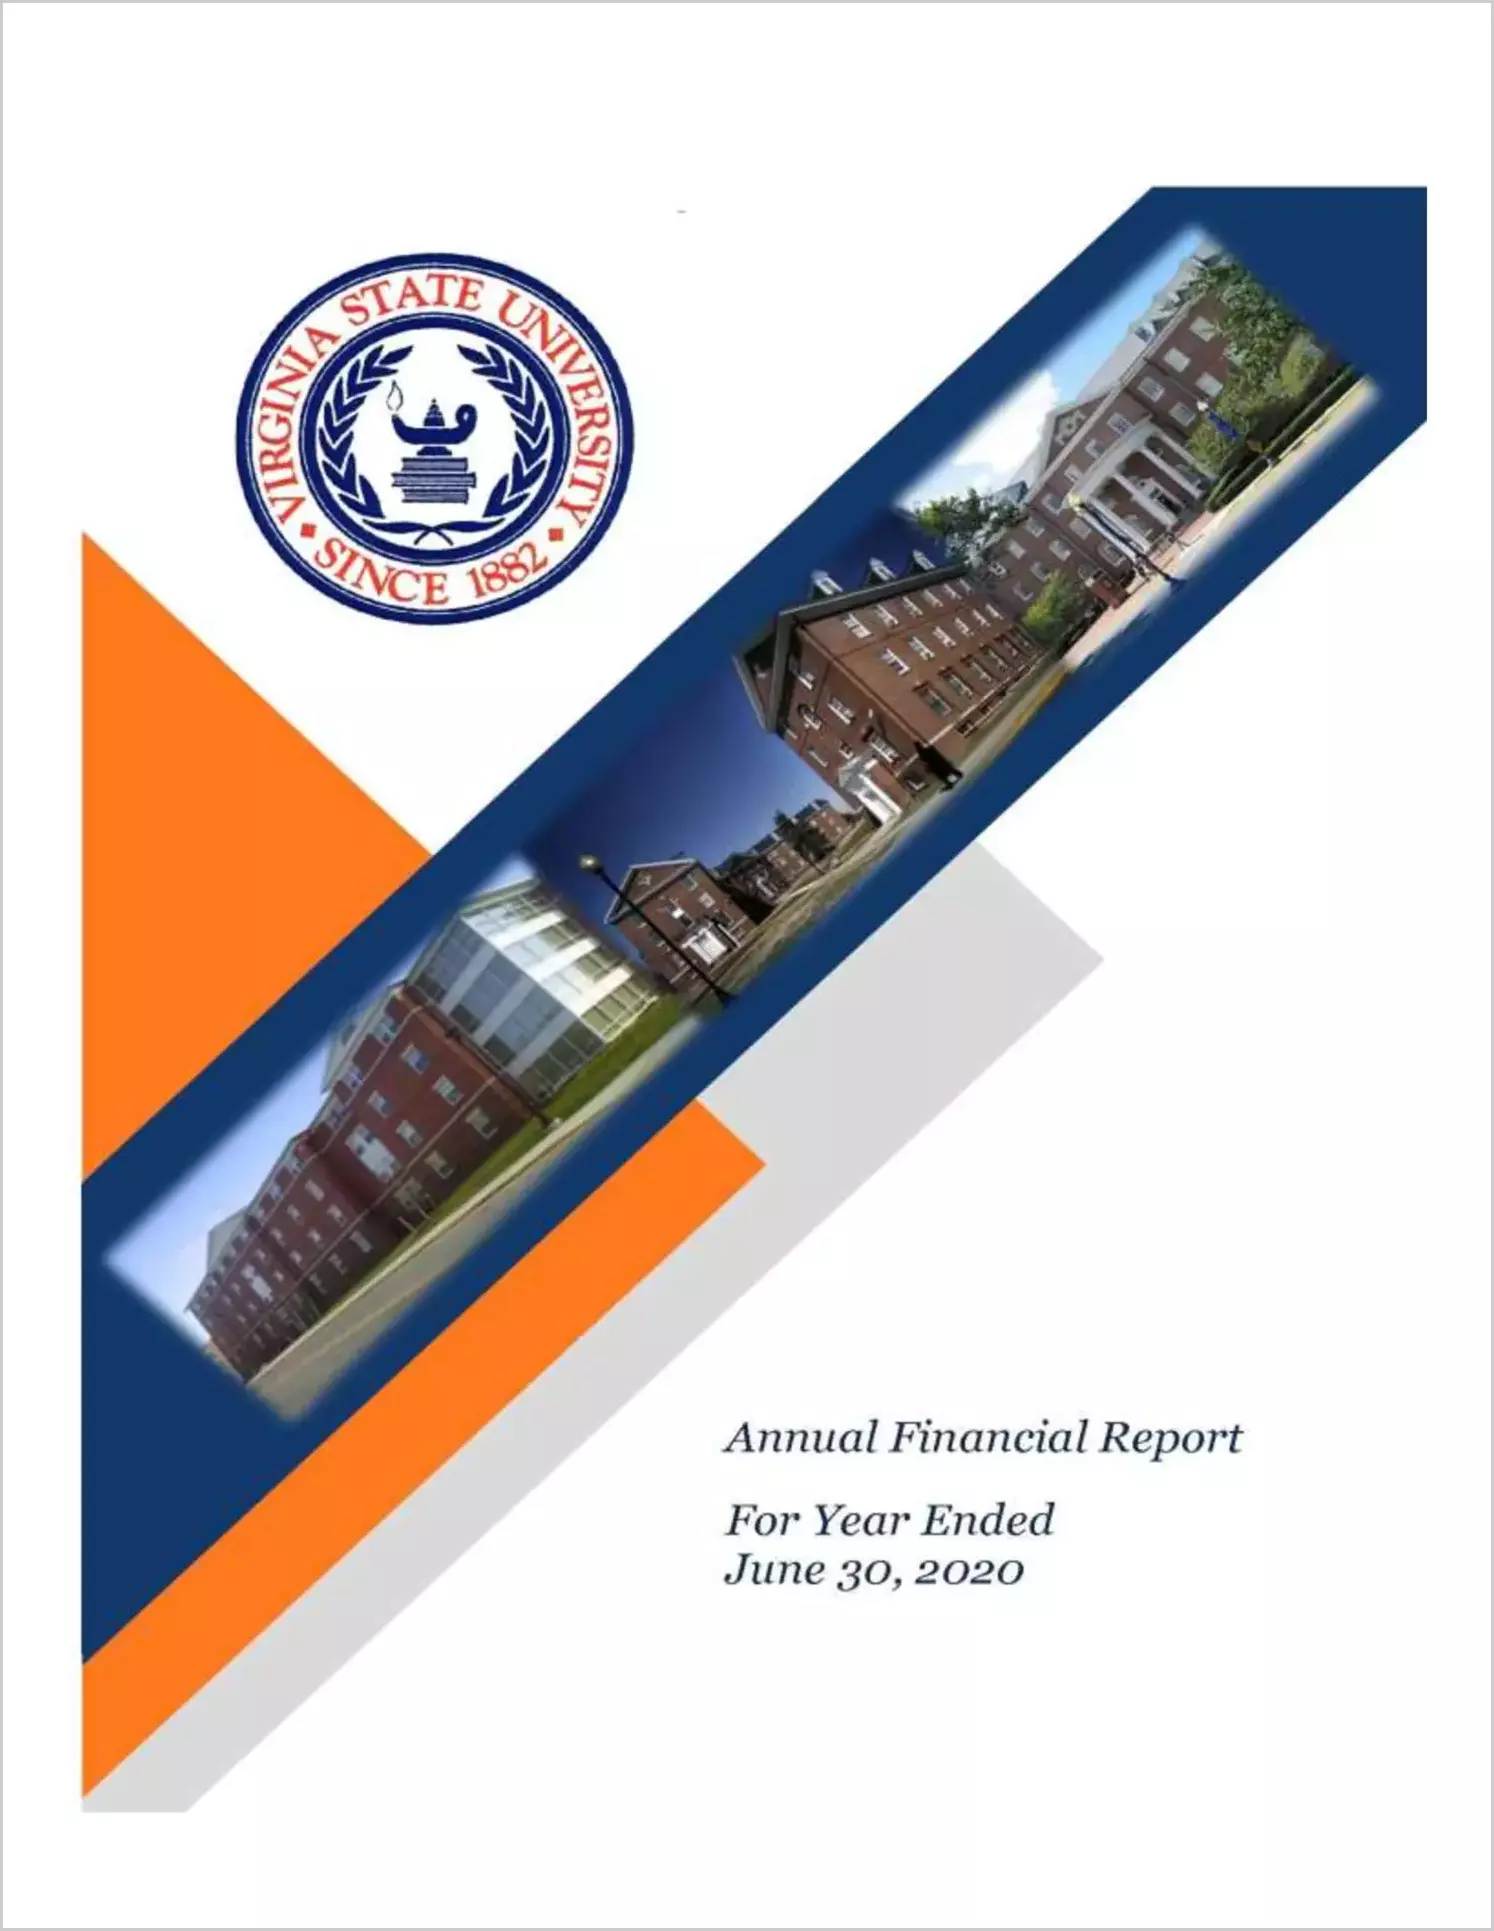 Virginia State University Financial Statements for the period July 1, 2019 through June 30, 2020